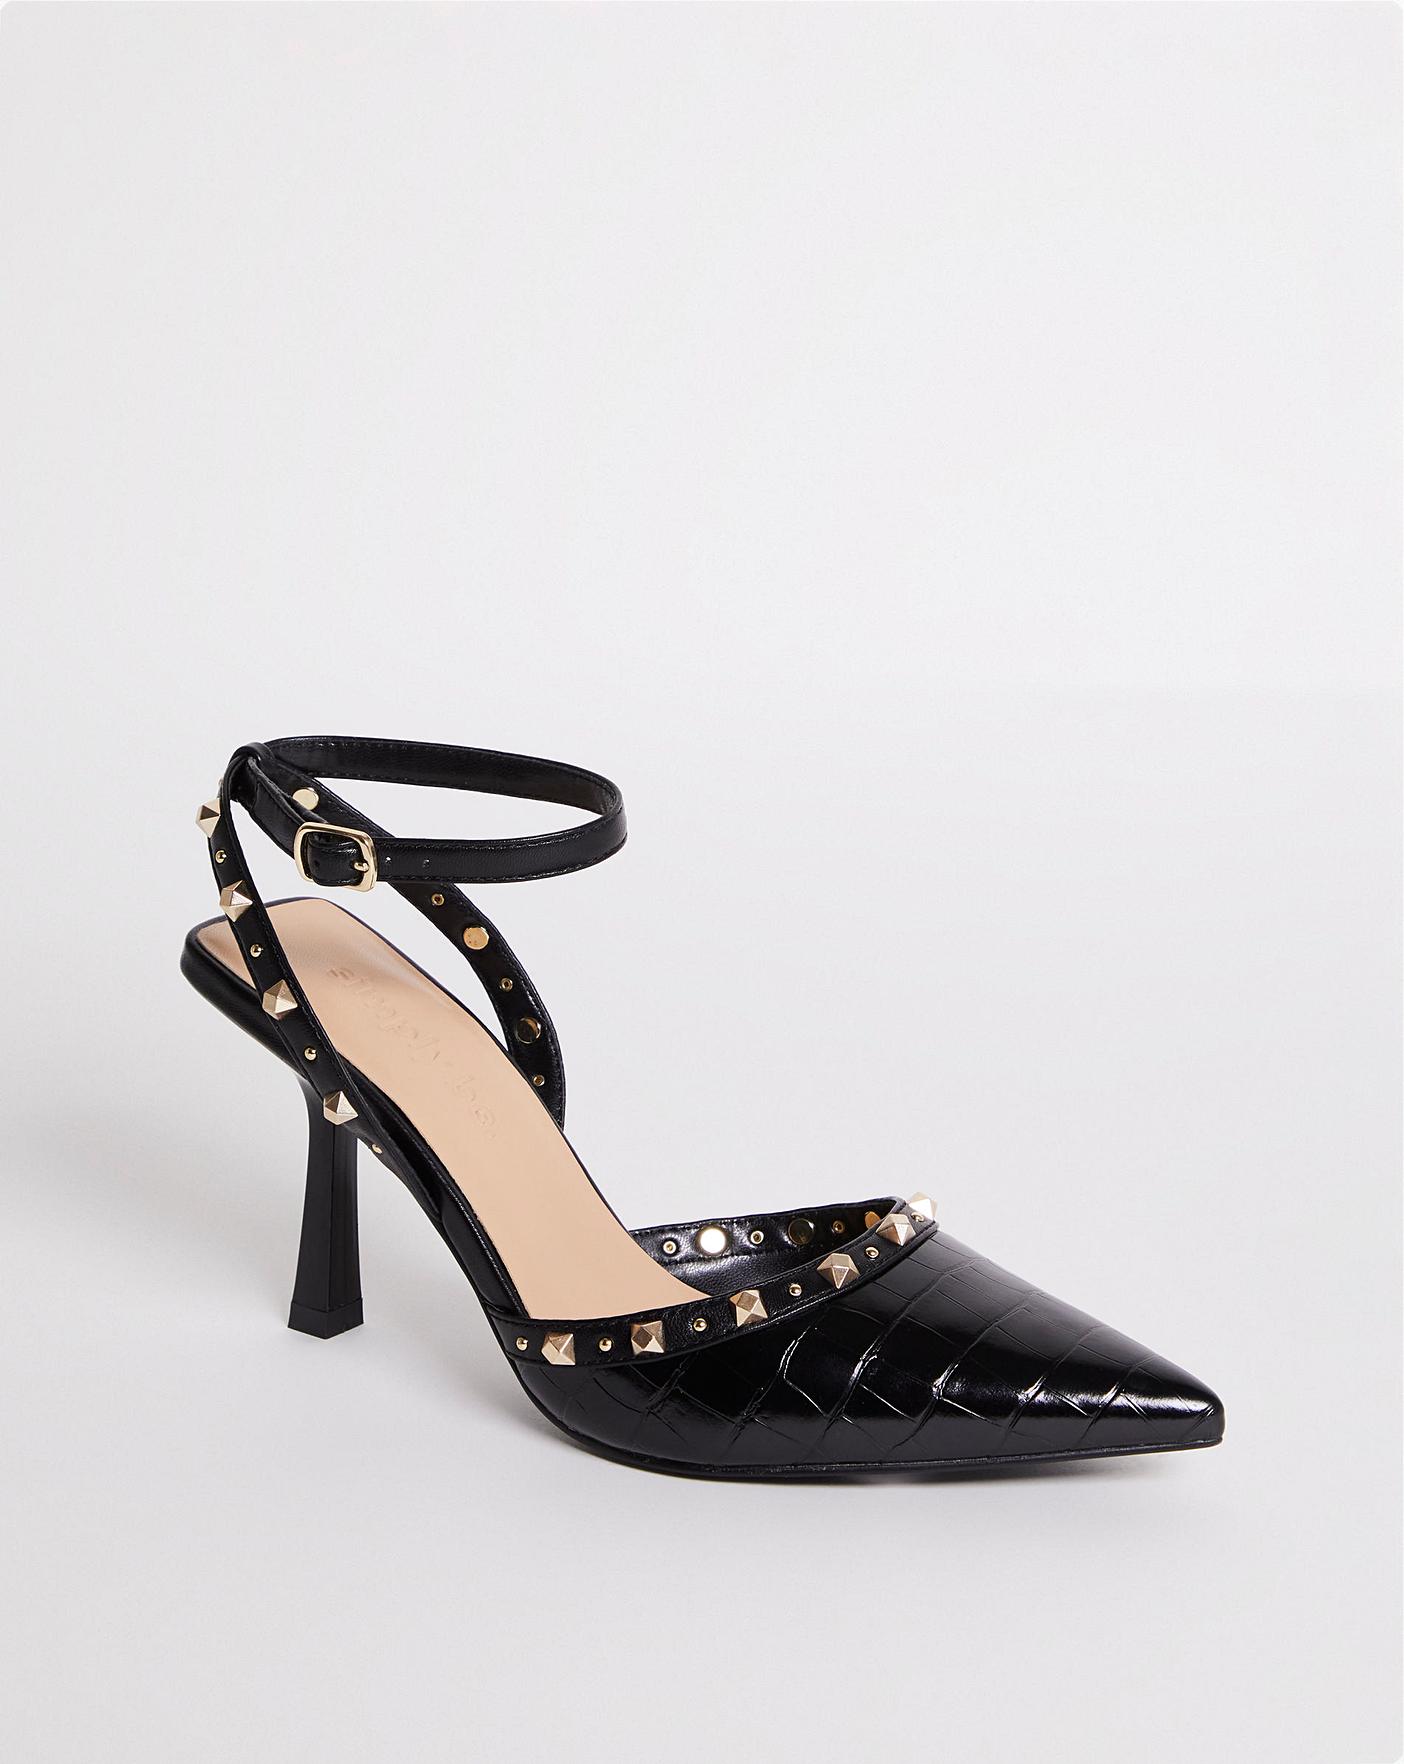 Fashion High Heels Women Pointy Dress Shoes Rivet Nude Studded Pointed  Sandals Banquet Stylist Shoes Party Summer Leather Shoe Stiletto Heel From  Dayremit, $42.99 | DHgate.Com